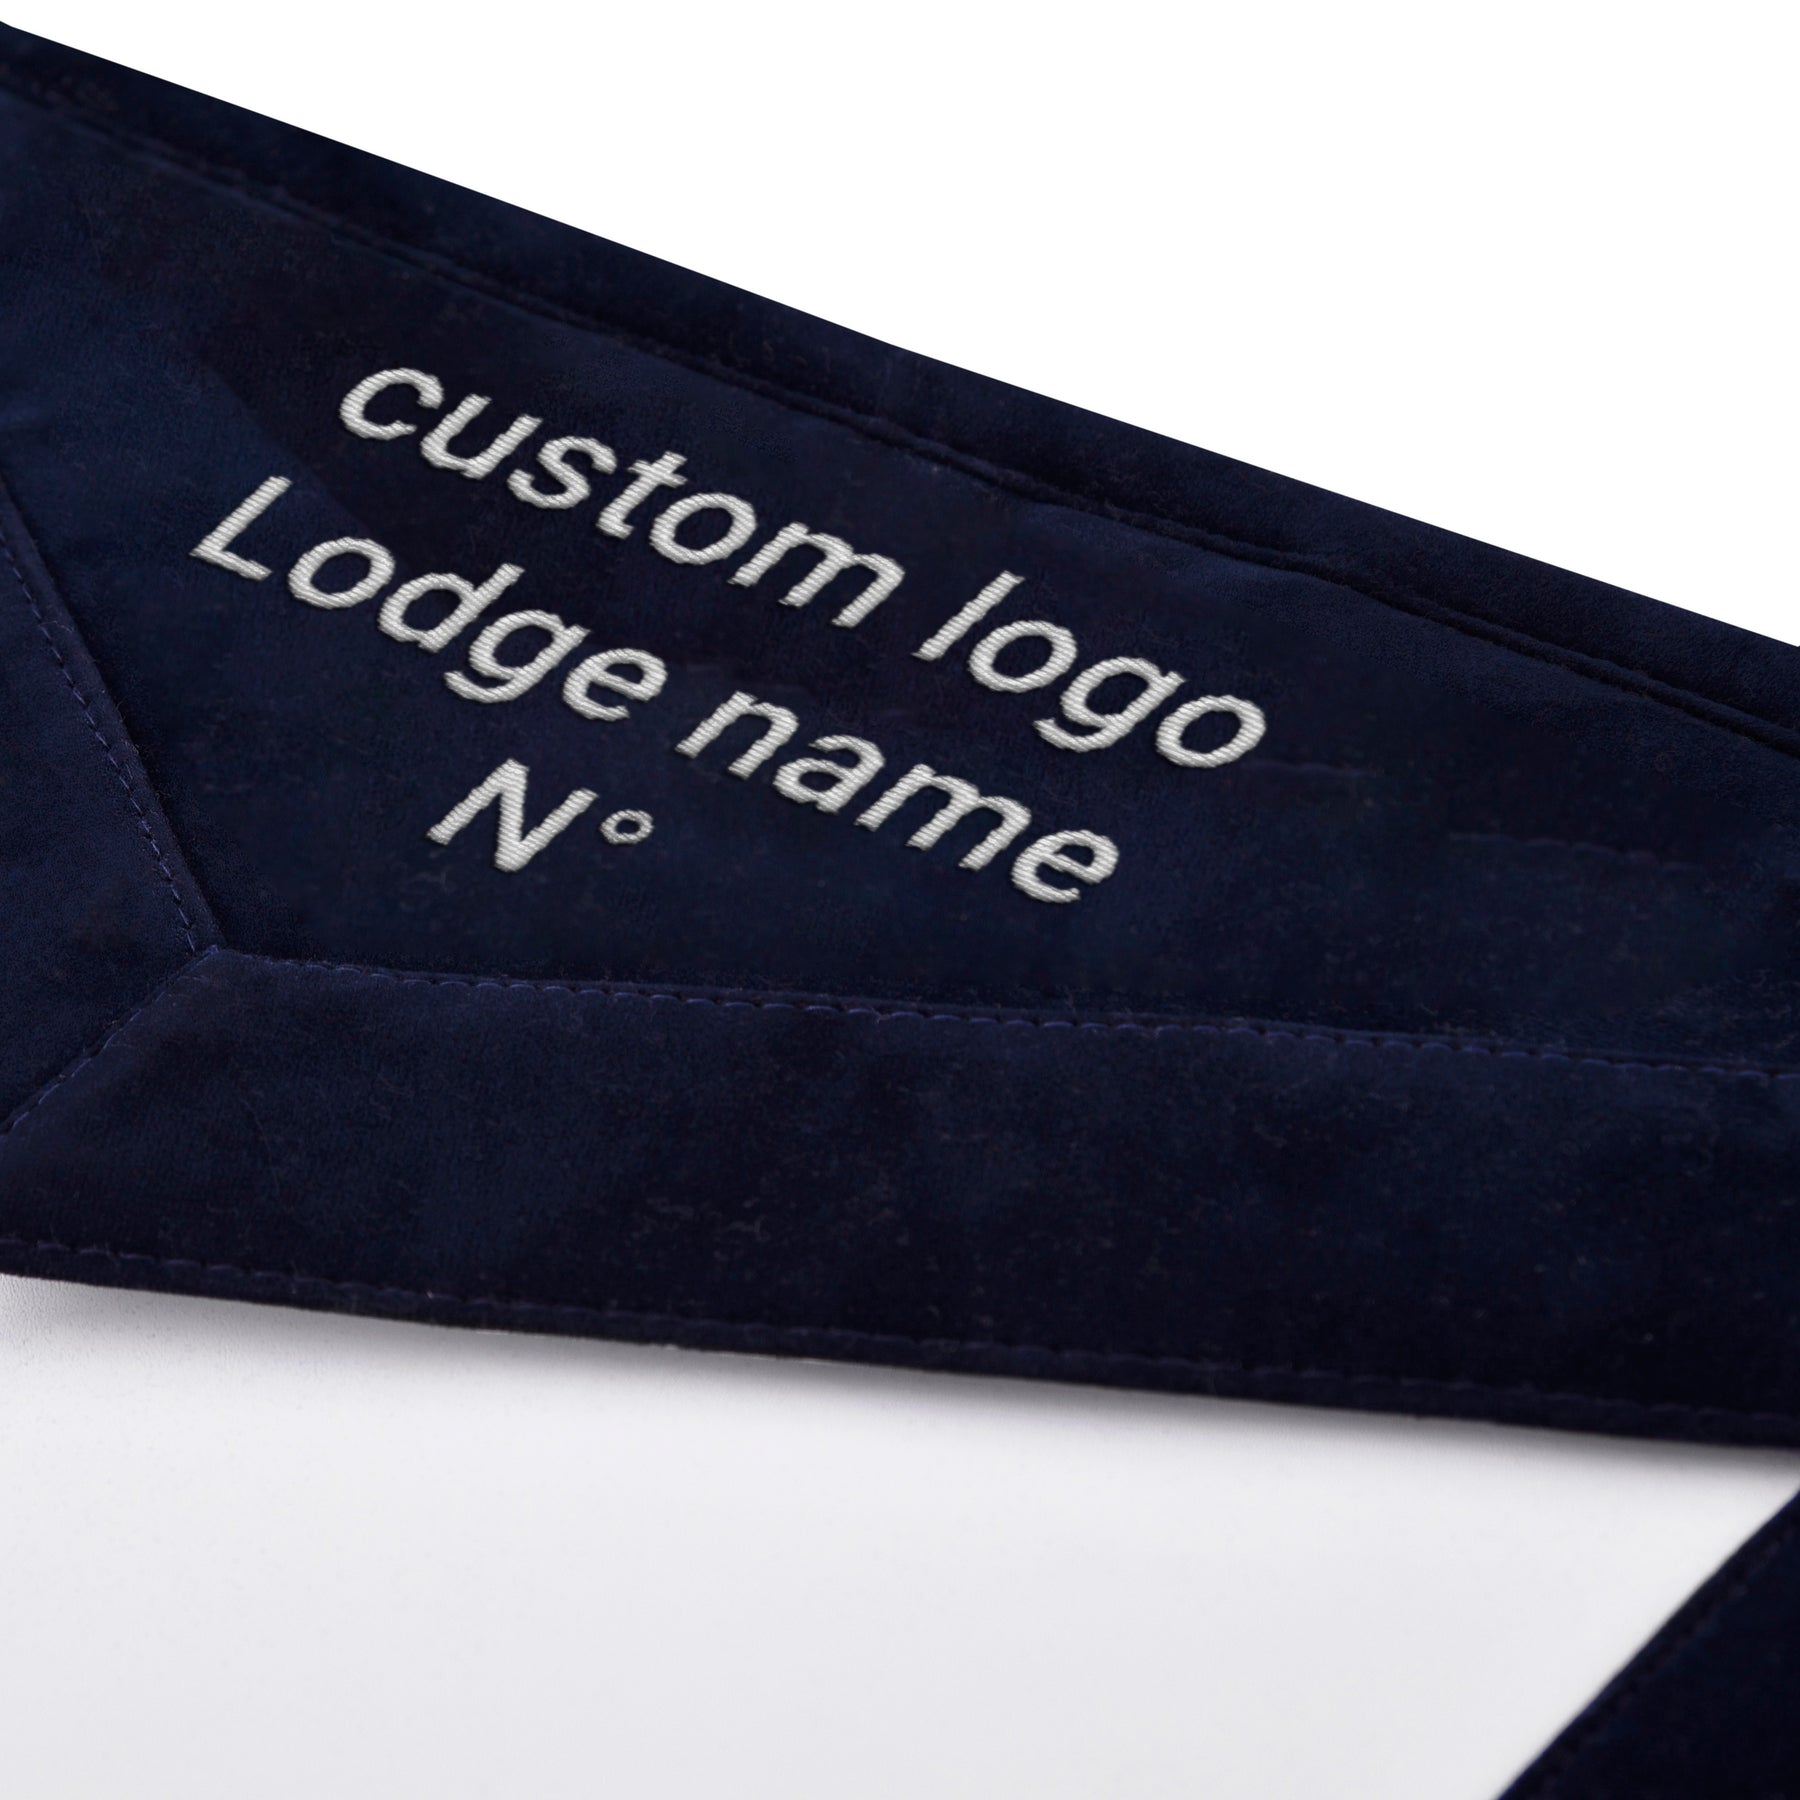 Historian Blue Lodge Officer Apron - Navy Velvet With Silver Embroidery Thread